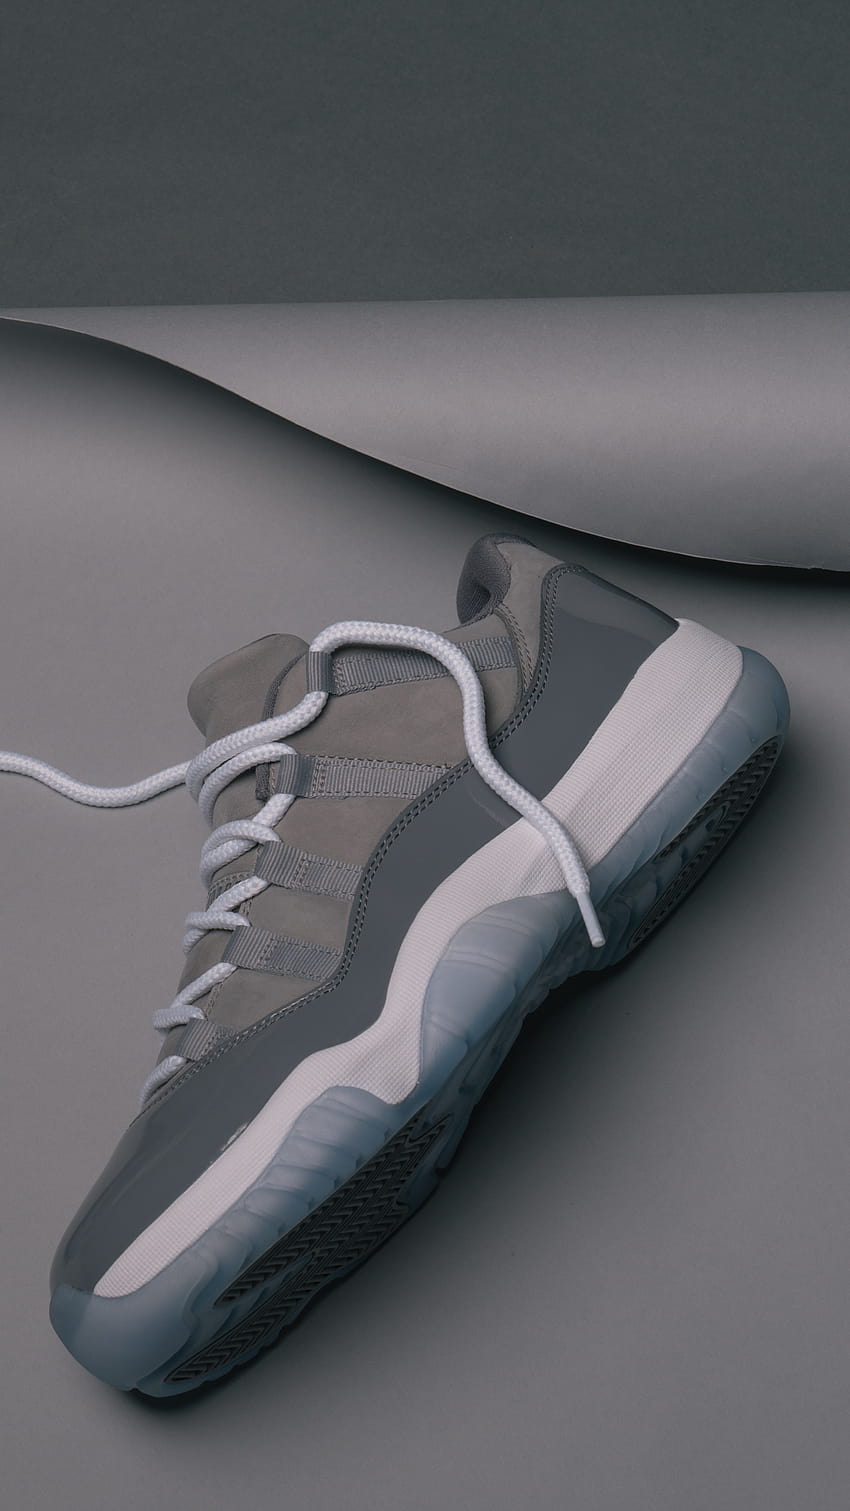 Up Close With The Air Jordan 11 Low Cool Grey That Releases Tomorrow • KicksOnFire, jordans cool grays HD phone wallpaper